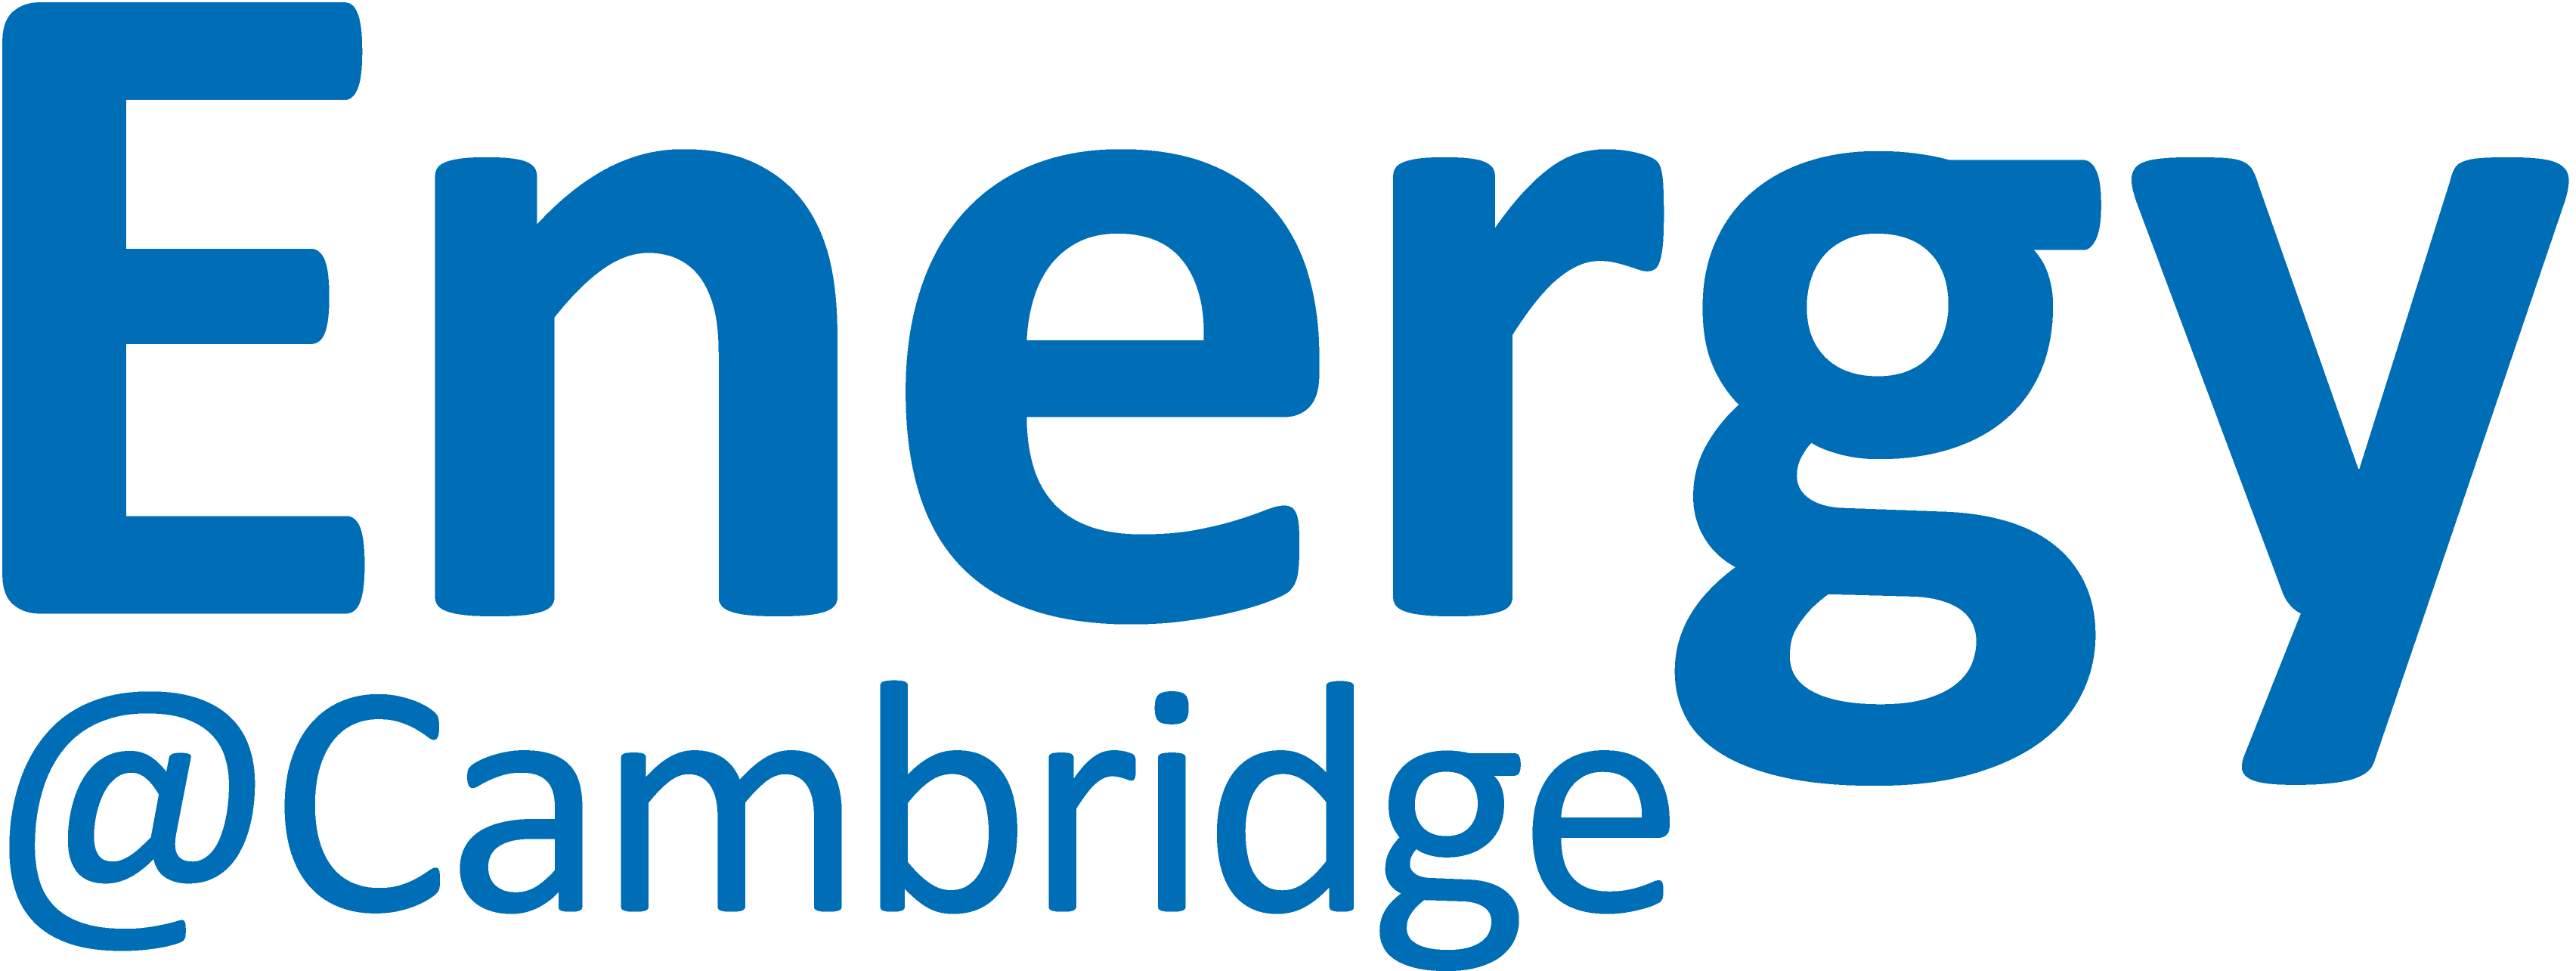 Call for Energy Champions